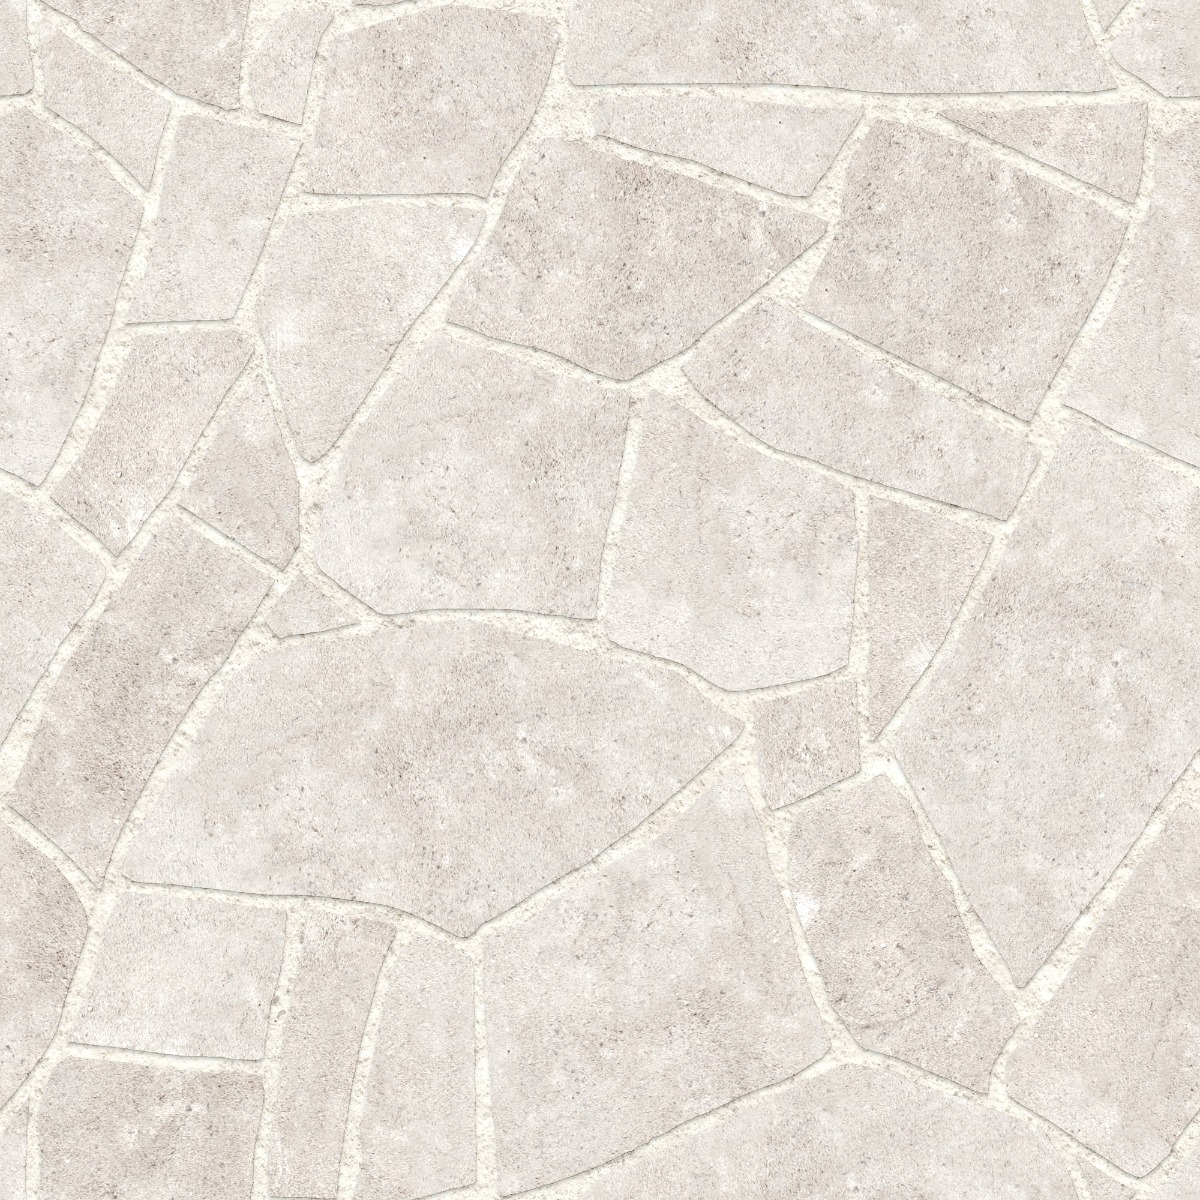 A seamless stone texture with limestone blocks arranged in a Crazy Paving pattern